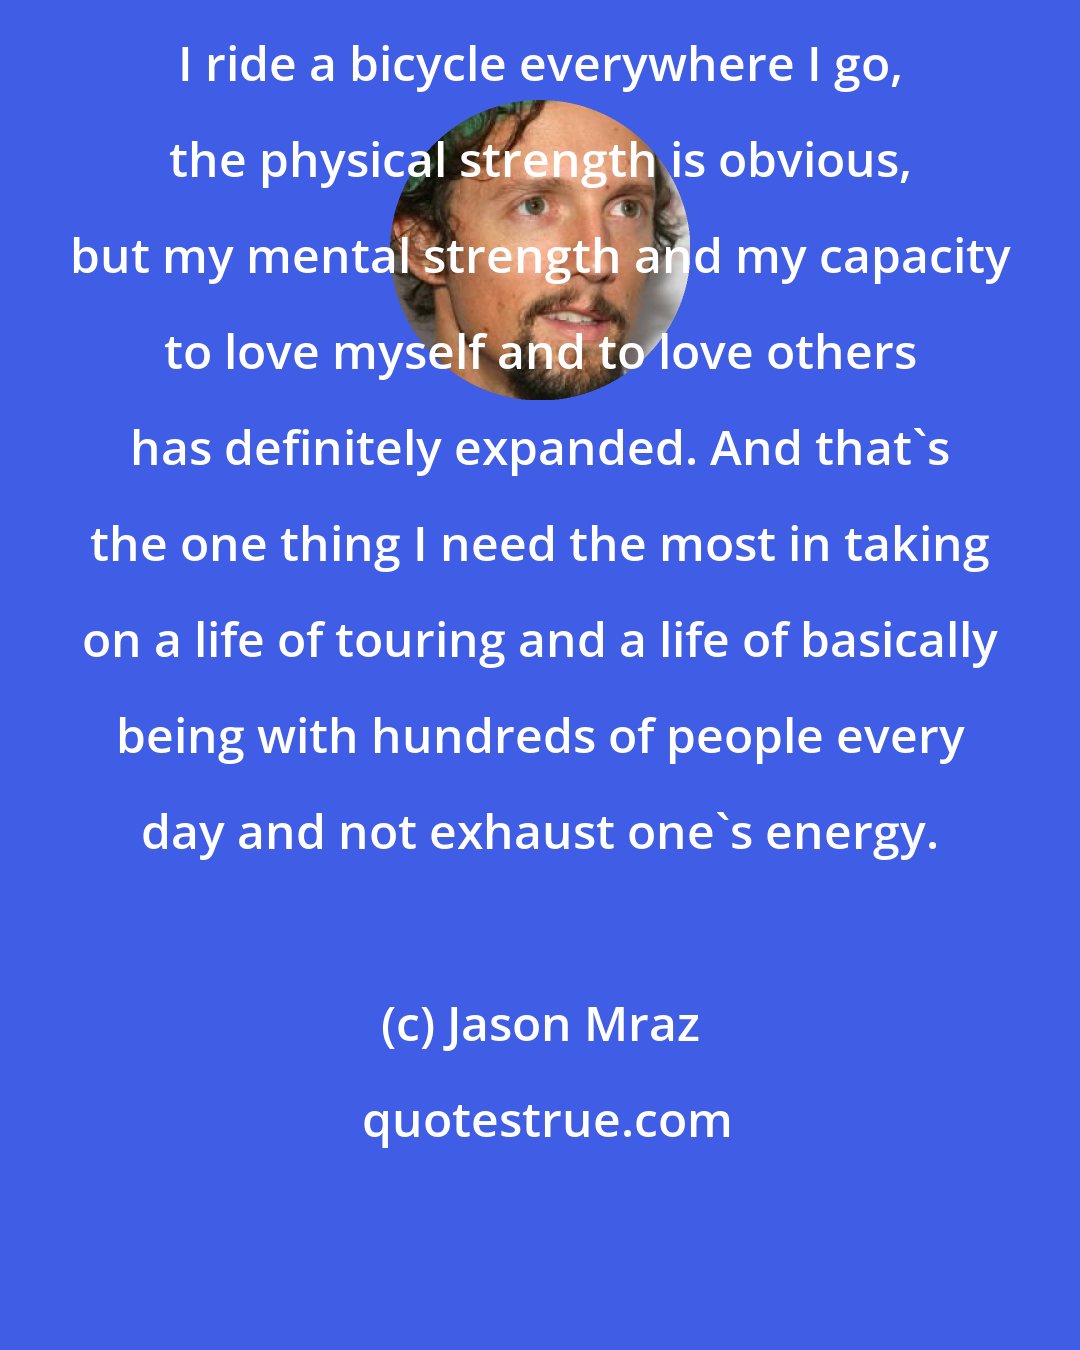 Jason Mraz: I ride a bicycle everywhere I go, the physical strength is obvious, but my mental strength and my capacity to love myself and to love others has definitely expanded. And that's the one thing I need the most in taking on a life of touring and a life of basically being with hundreds of people every day and not exhaust one's energy.